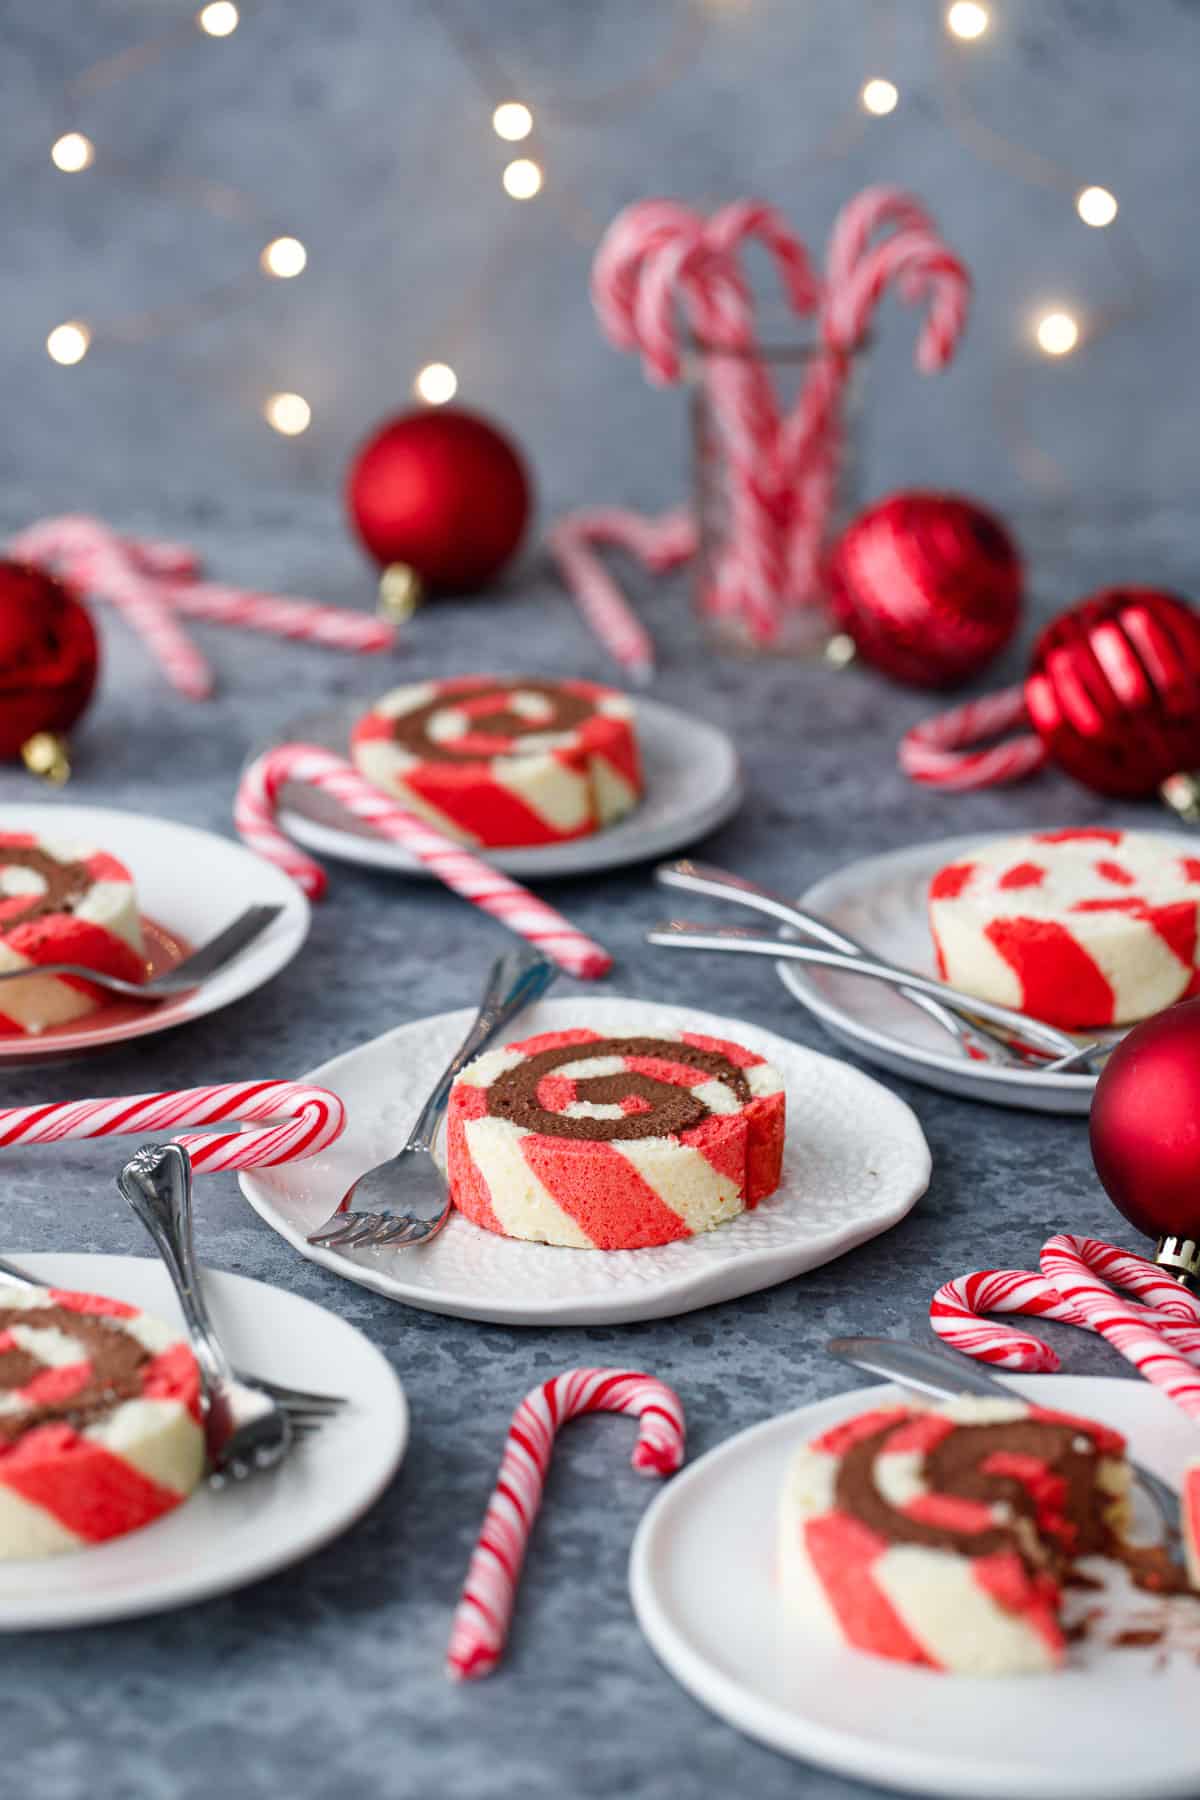 Slices of red and white striped Peppermint Cake Rolls on multiple different plates, with out of focus Christmas lights, candy canes, and red ornaments scattered around.